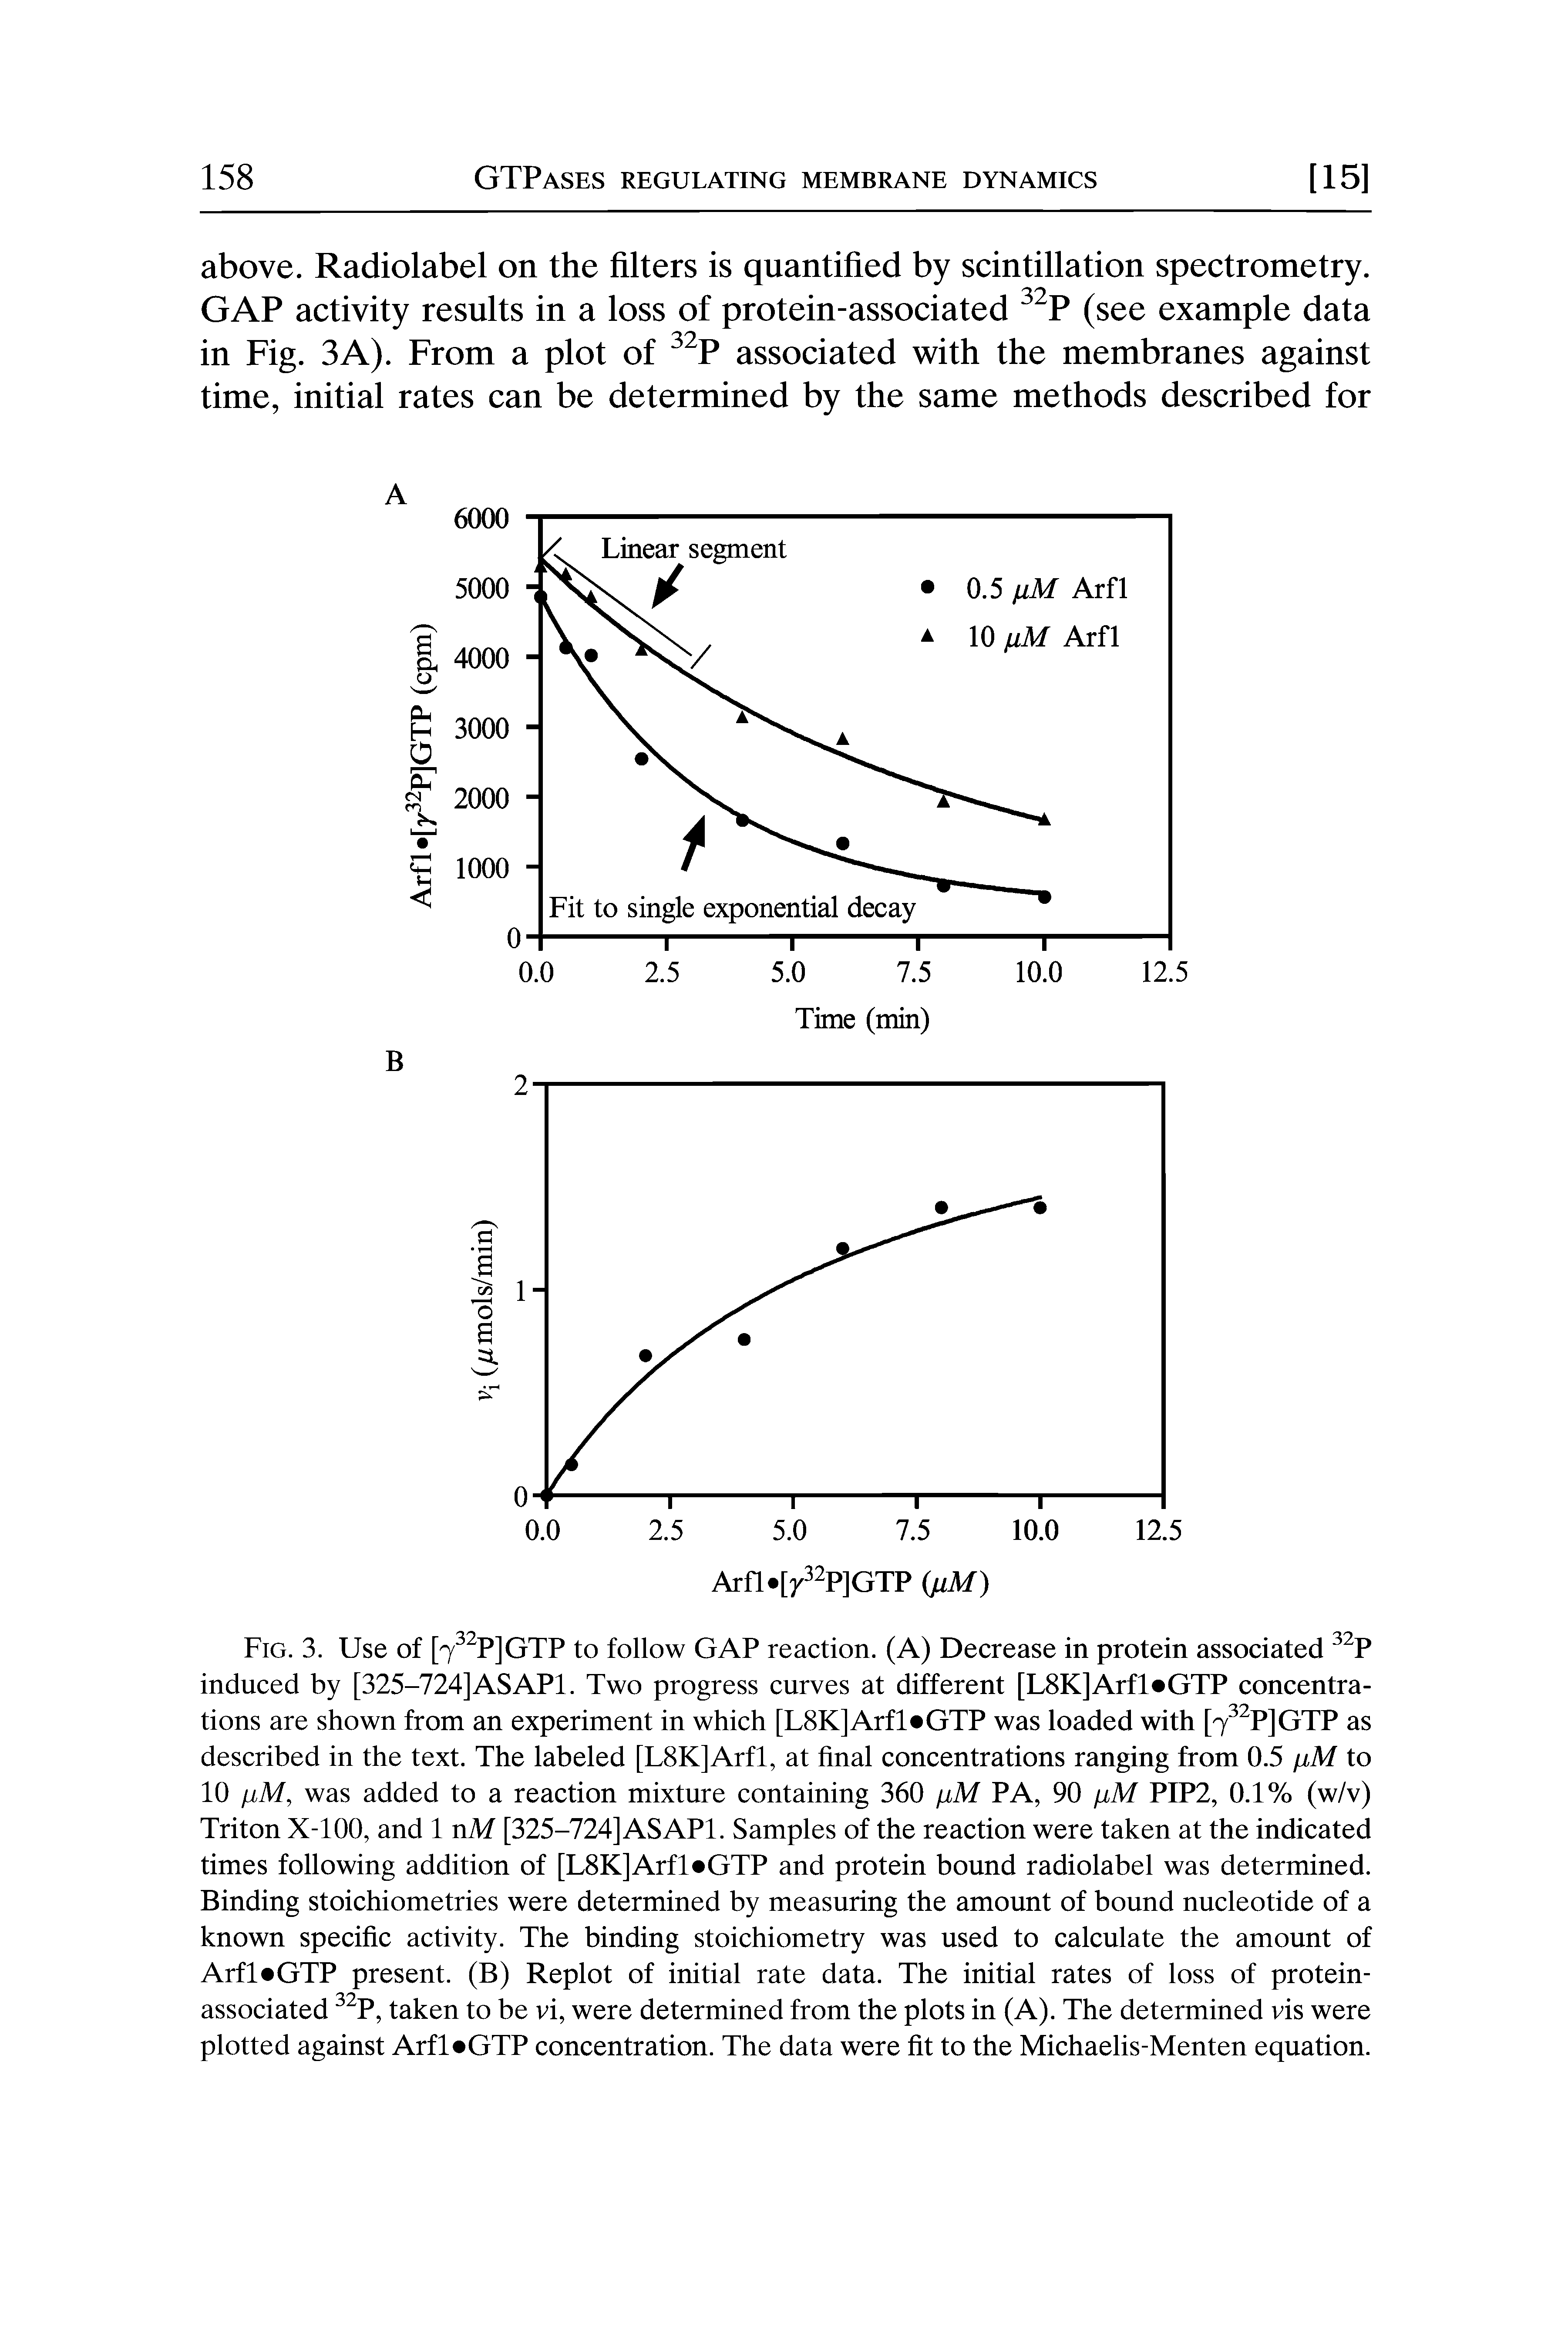 Fig. 3. Use of [7 P]GTP to follow GAP reaction. (A) Decrease in protein associated P induced by [325-724] AS API. Two progress curves at different [L8K]Arfl GTP concentrations are shown from an experiment in which [L8K]Arfl GTP was loaded with [7 P]GTP as described in the text. The labeled [L8K]Arfl, at final concentrations ranging from 0.5 ijlM to 10 iiM, was added to a reaction mixture containing 360 PA, 90 iiM PIP2, 0.1% (w/v) Triton X-100, and 1 nM [325-724] AS API. Samples of the reaction were taken at the indicated times following addition of [L8K]Arfl GTP and protein bound radiolabel was determined. Binding stoichiometries were determined by measuring the amount of bound nucleotide of a known specific activity. The binding stoichiometry was used to calculate the amount of Arfl GTP present. (B) Replot of initial rate data. The initial rates of loss of protein-associated P, taken to be vi, were determined from the plots in (A). The determined vis were plotted against Arfl GTP concentration. The data were fit to the Michaelis-Menten equation.